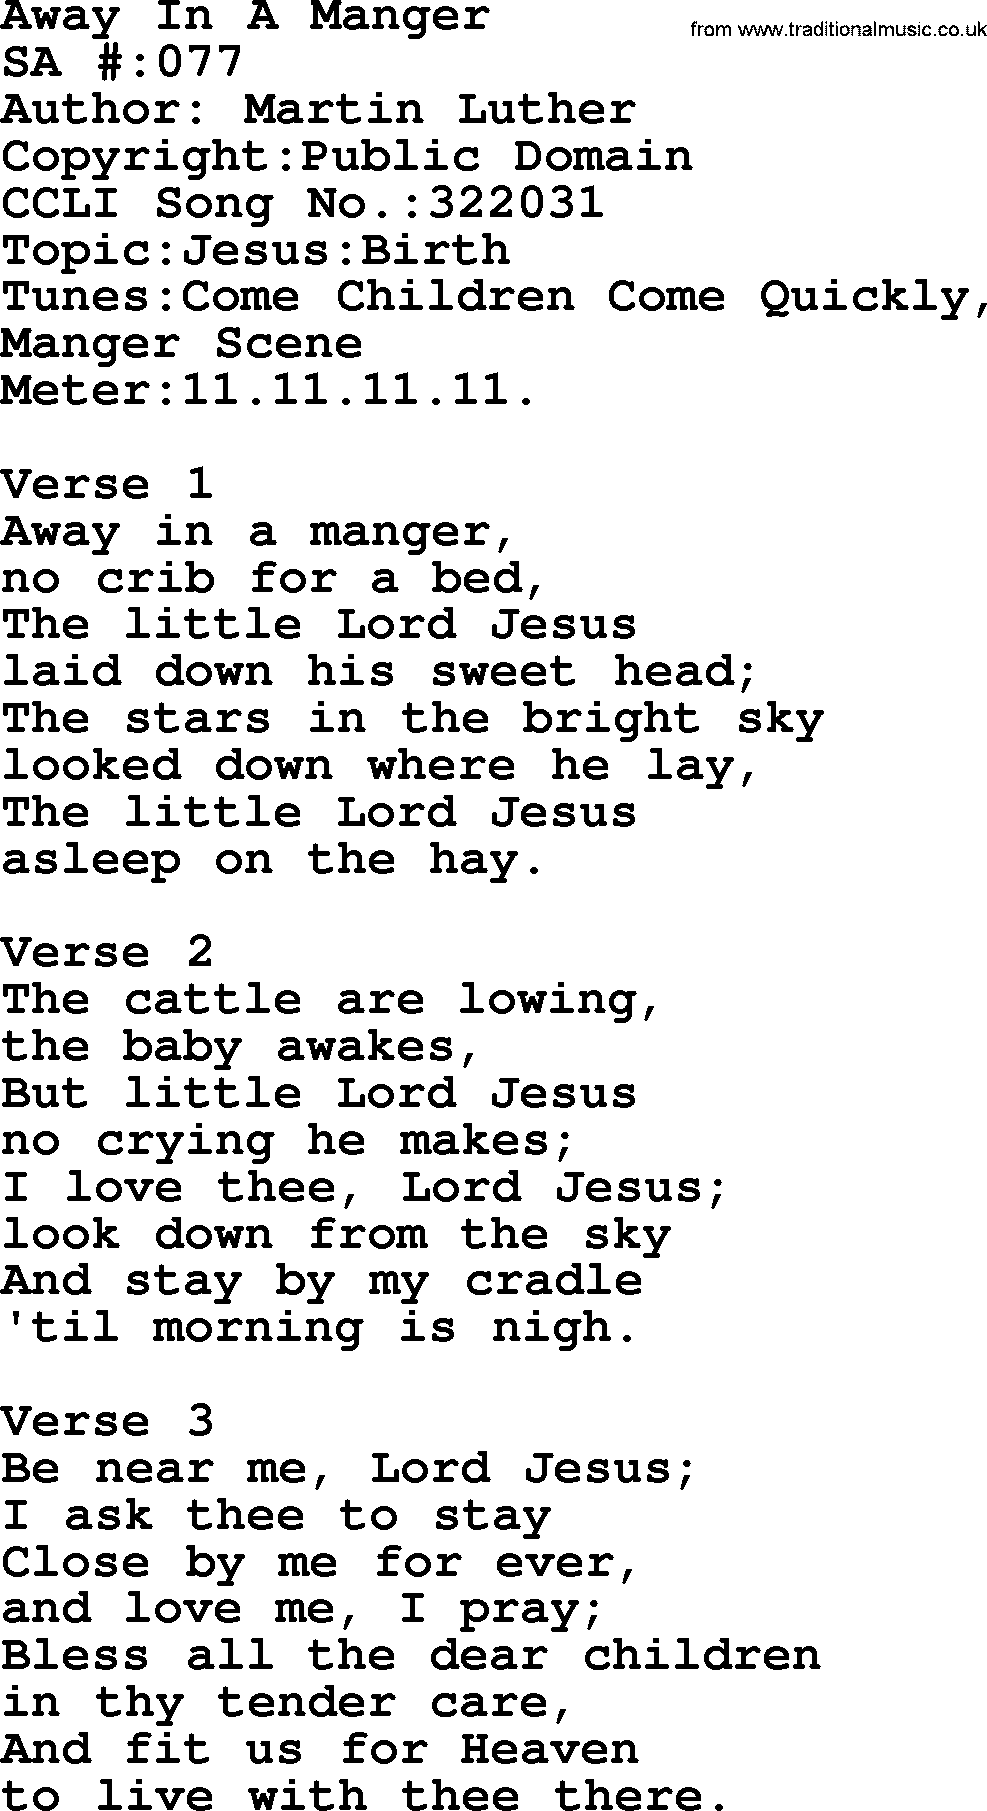 Salvation Army Hymnal, title: Away In A Manger, with lyrics and PDF,